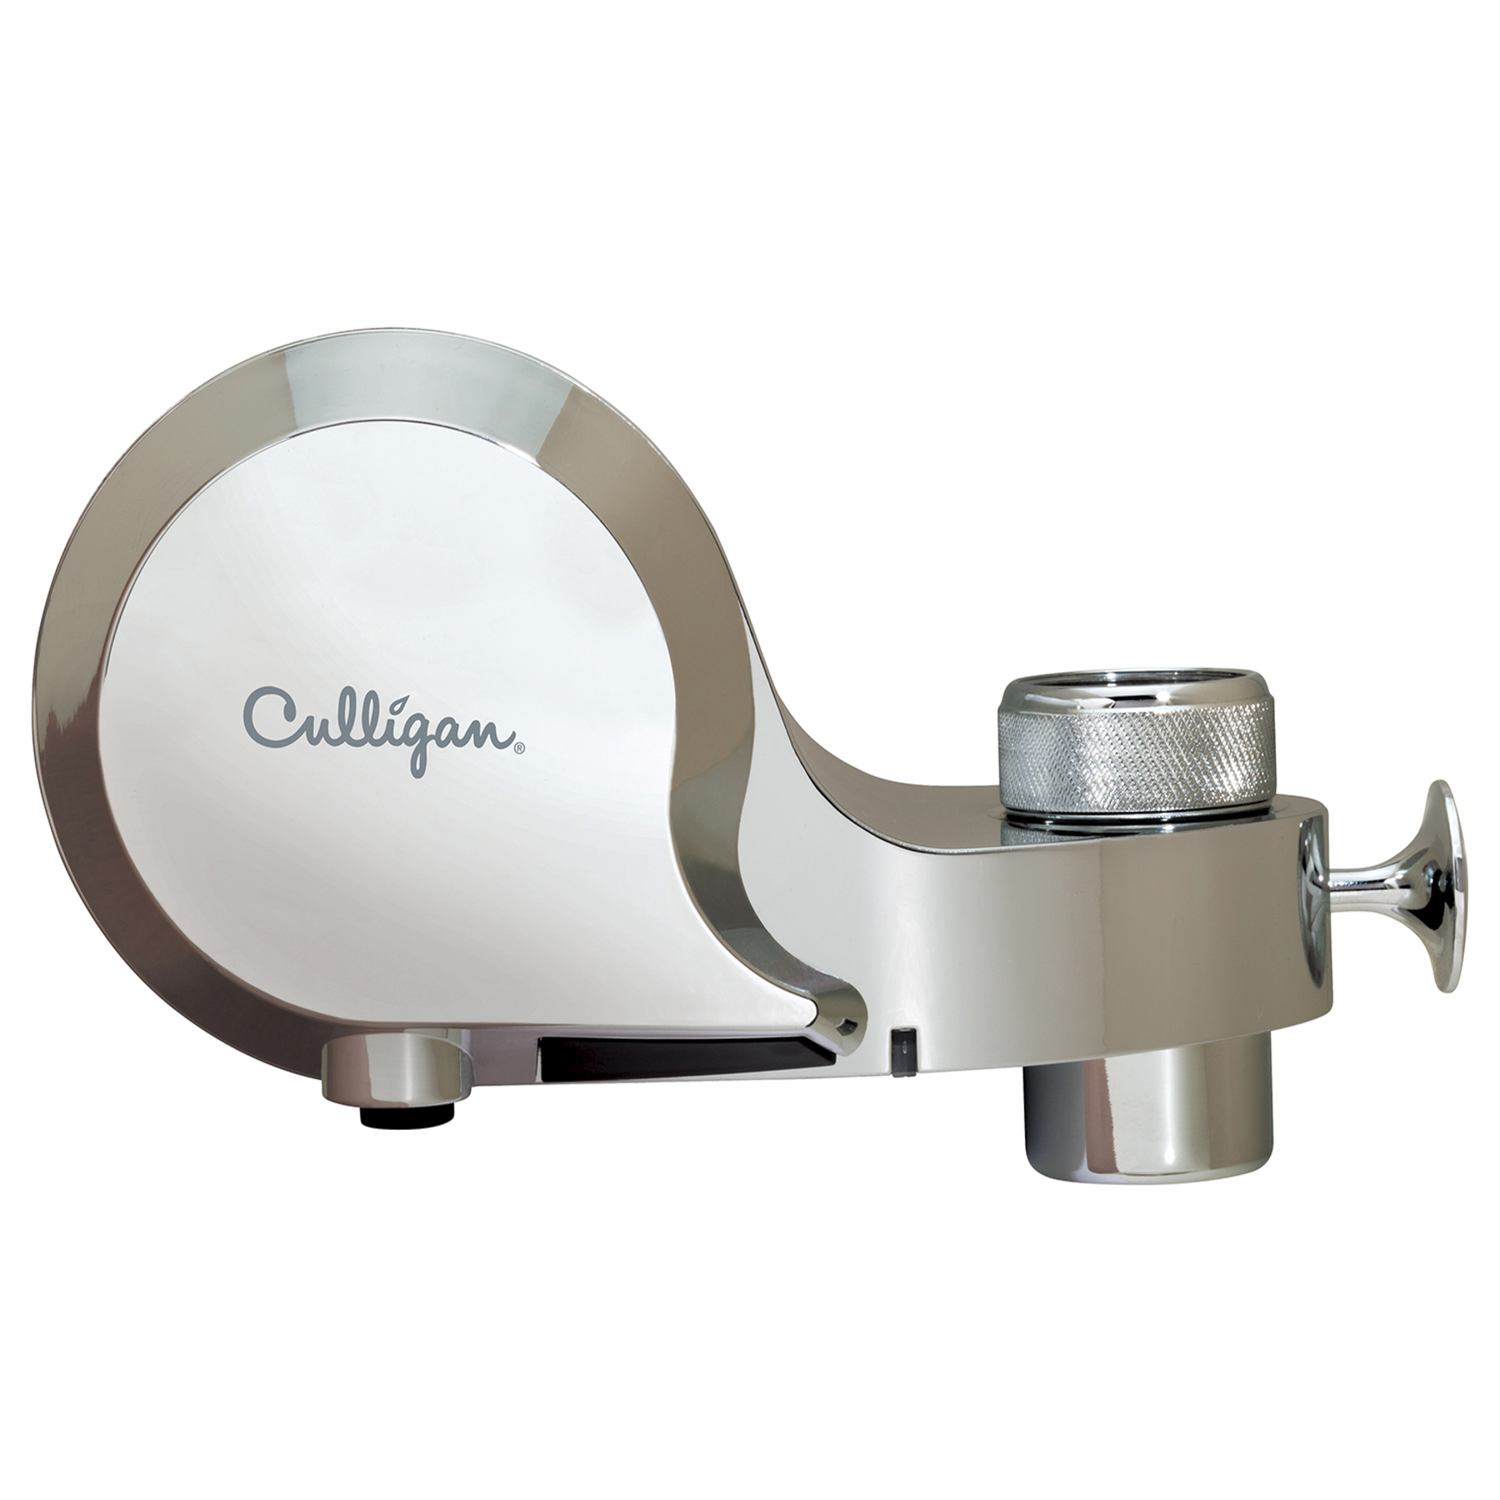 Photos - Other sanitary accessories Culligan Faucet Mount Drinking Water Filter CFM-300CR 